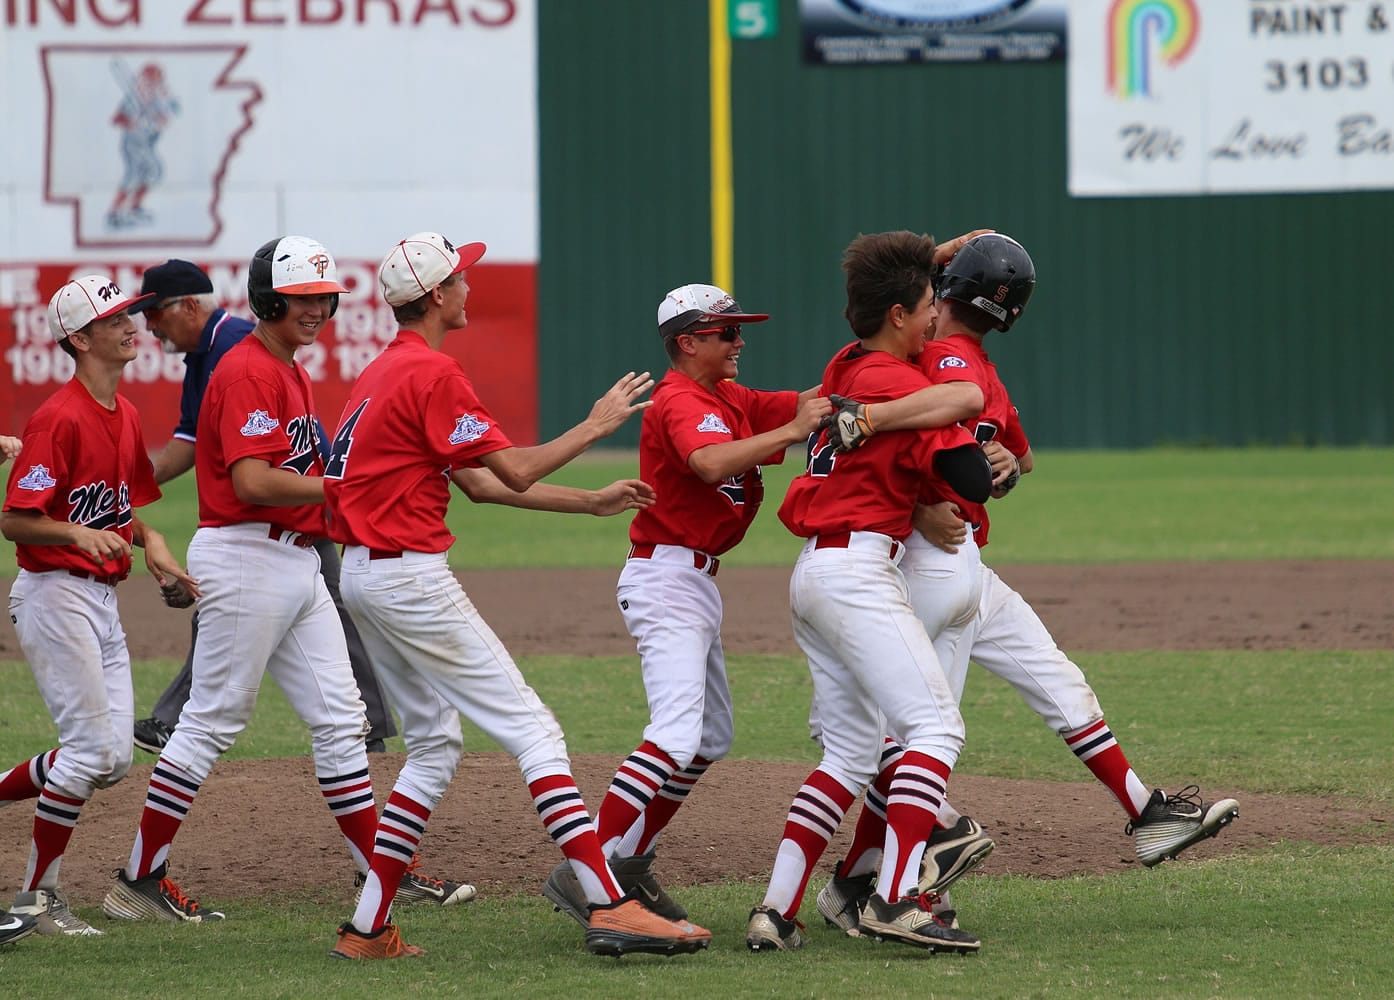 Hazel Dell Metro teammates congratulate Jasper Rank after his walk-off single scored Sam Lauderdale in Friday's 3-2 win over White Hall, Ark., in the Babe Ruth 14-Year-Old World Series.